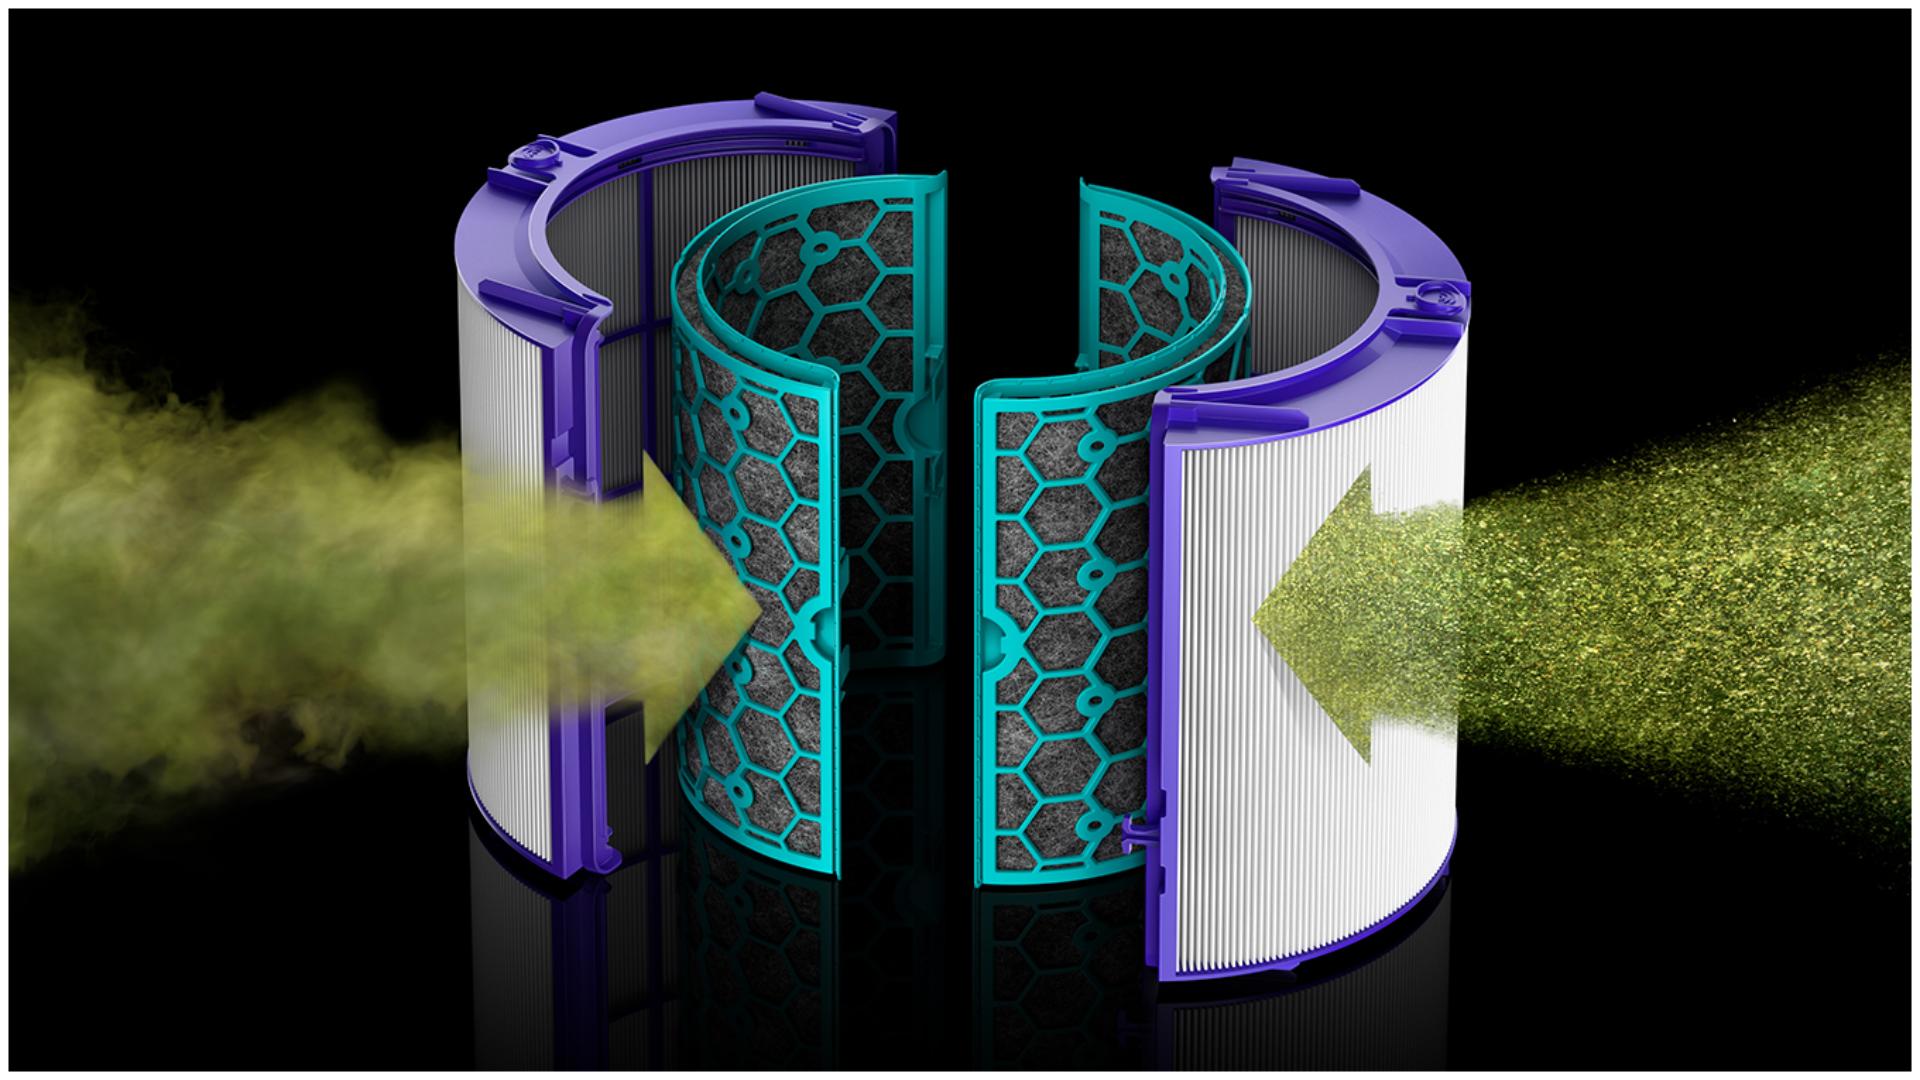 Exploded view of Dyson HEPA filter with pollutants entering